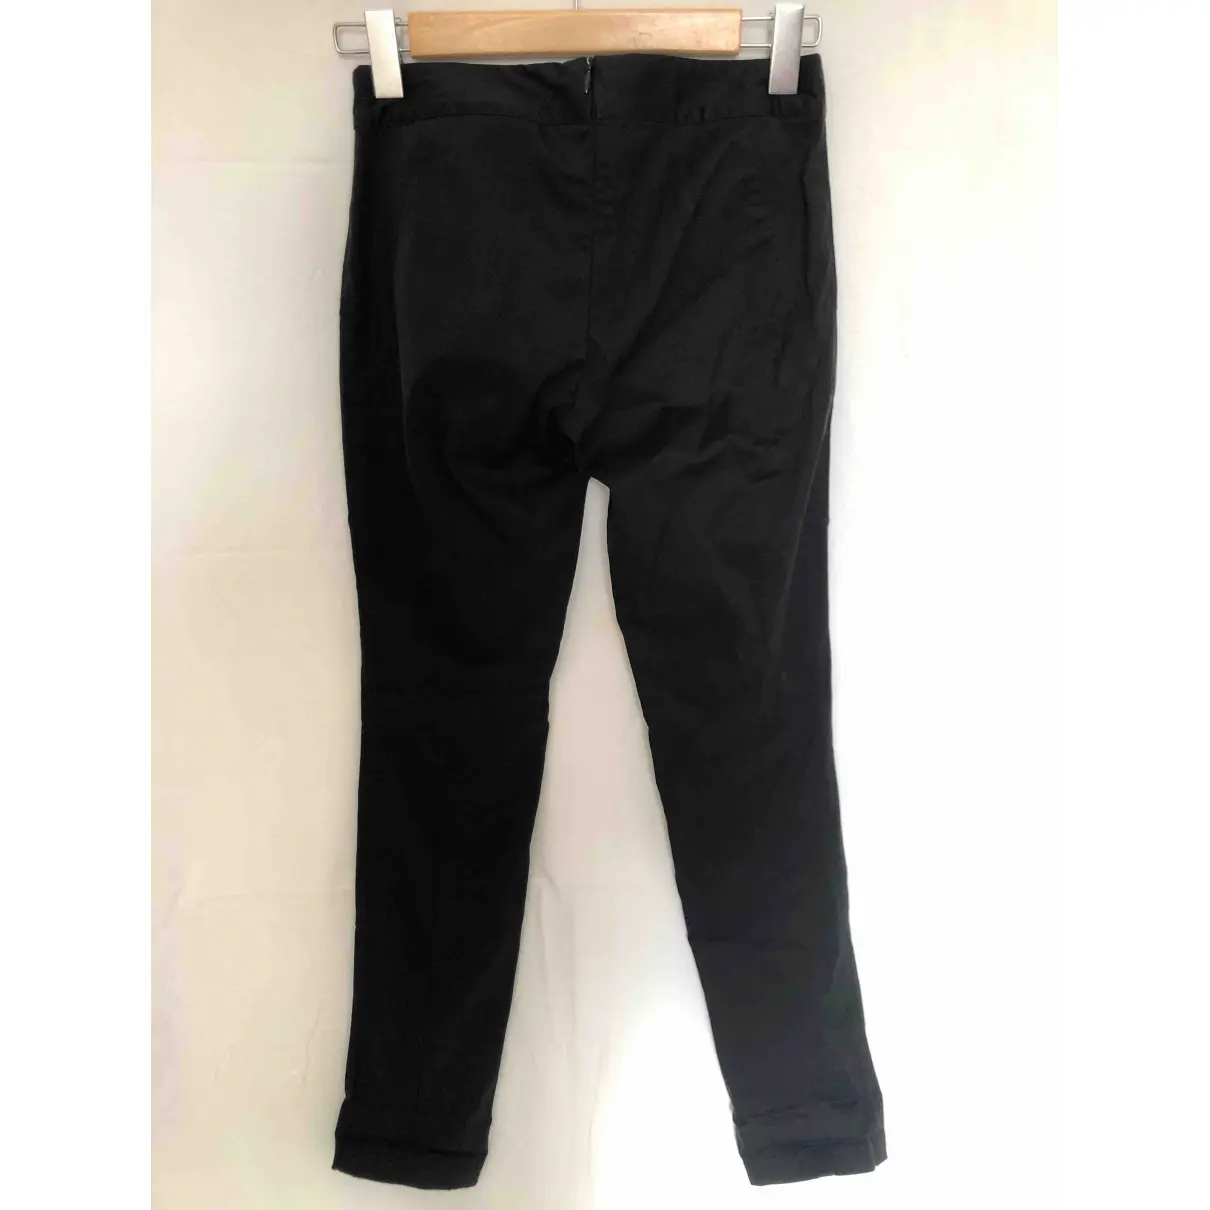 Buy Manning Cartell Trousers online